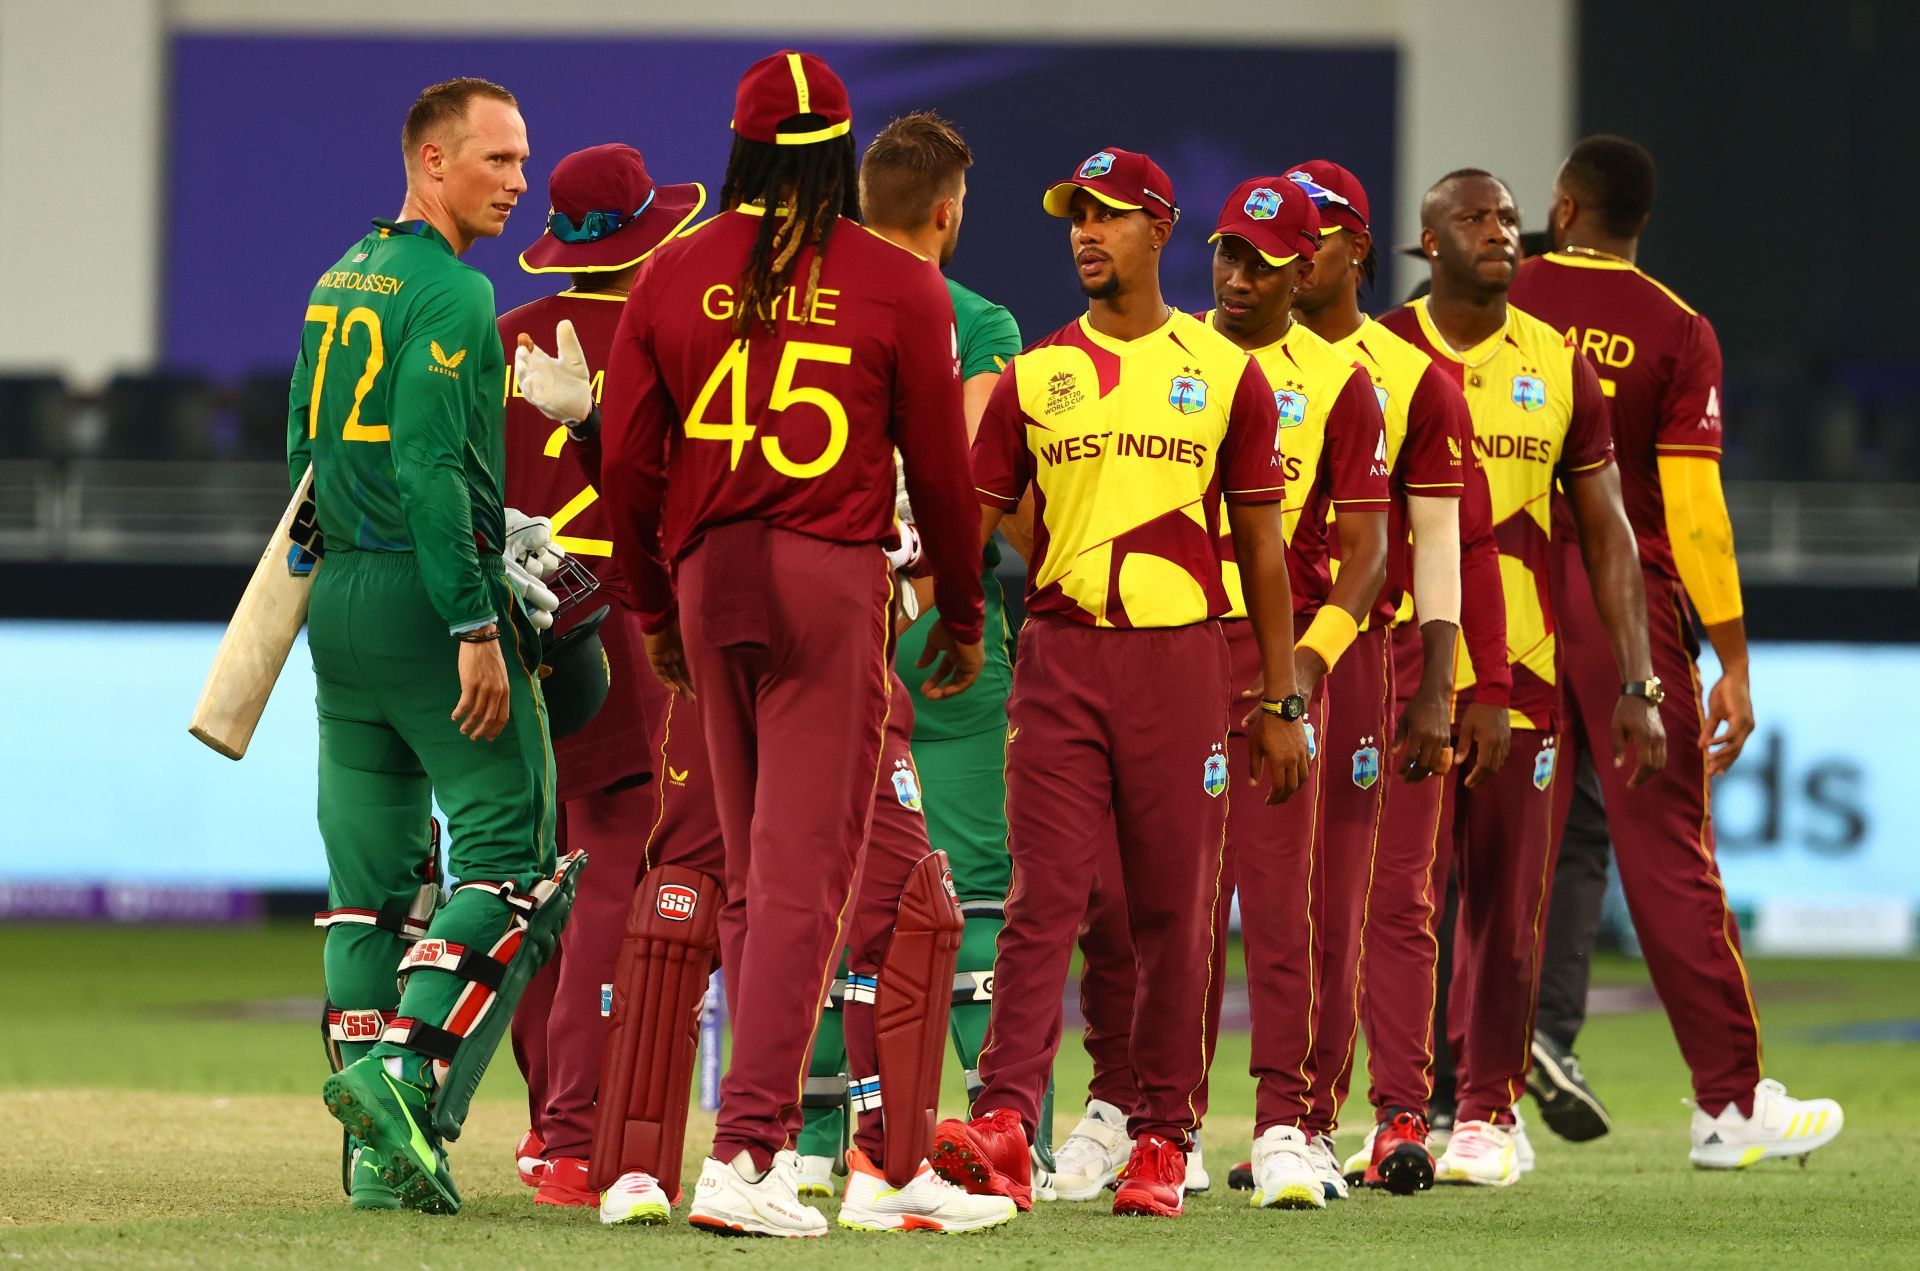 West Indies lost to South Africa in the group stage this year just like 2007